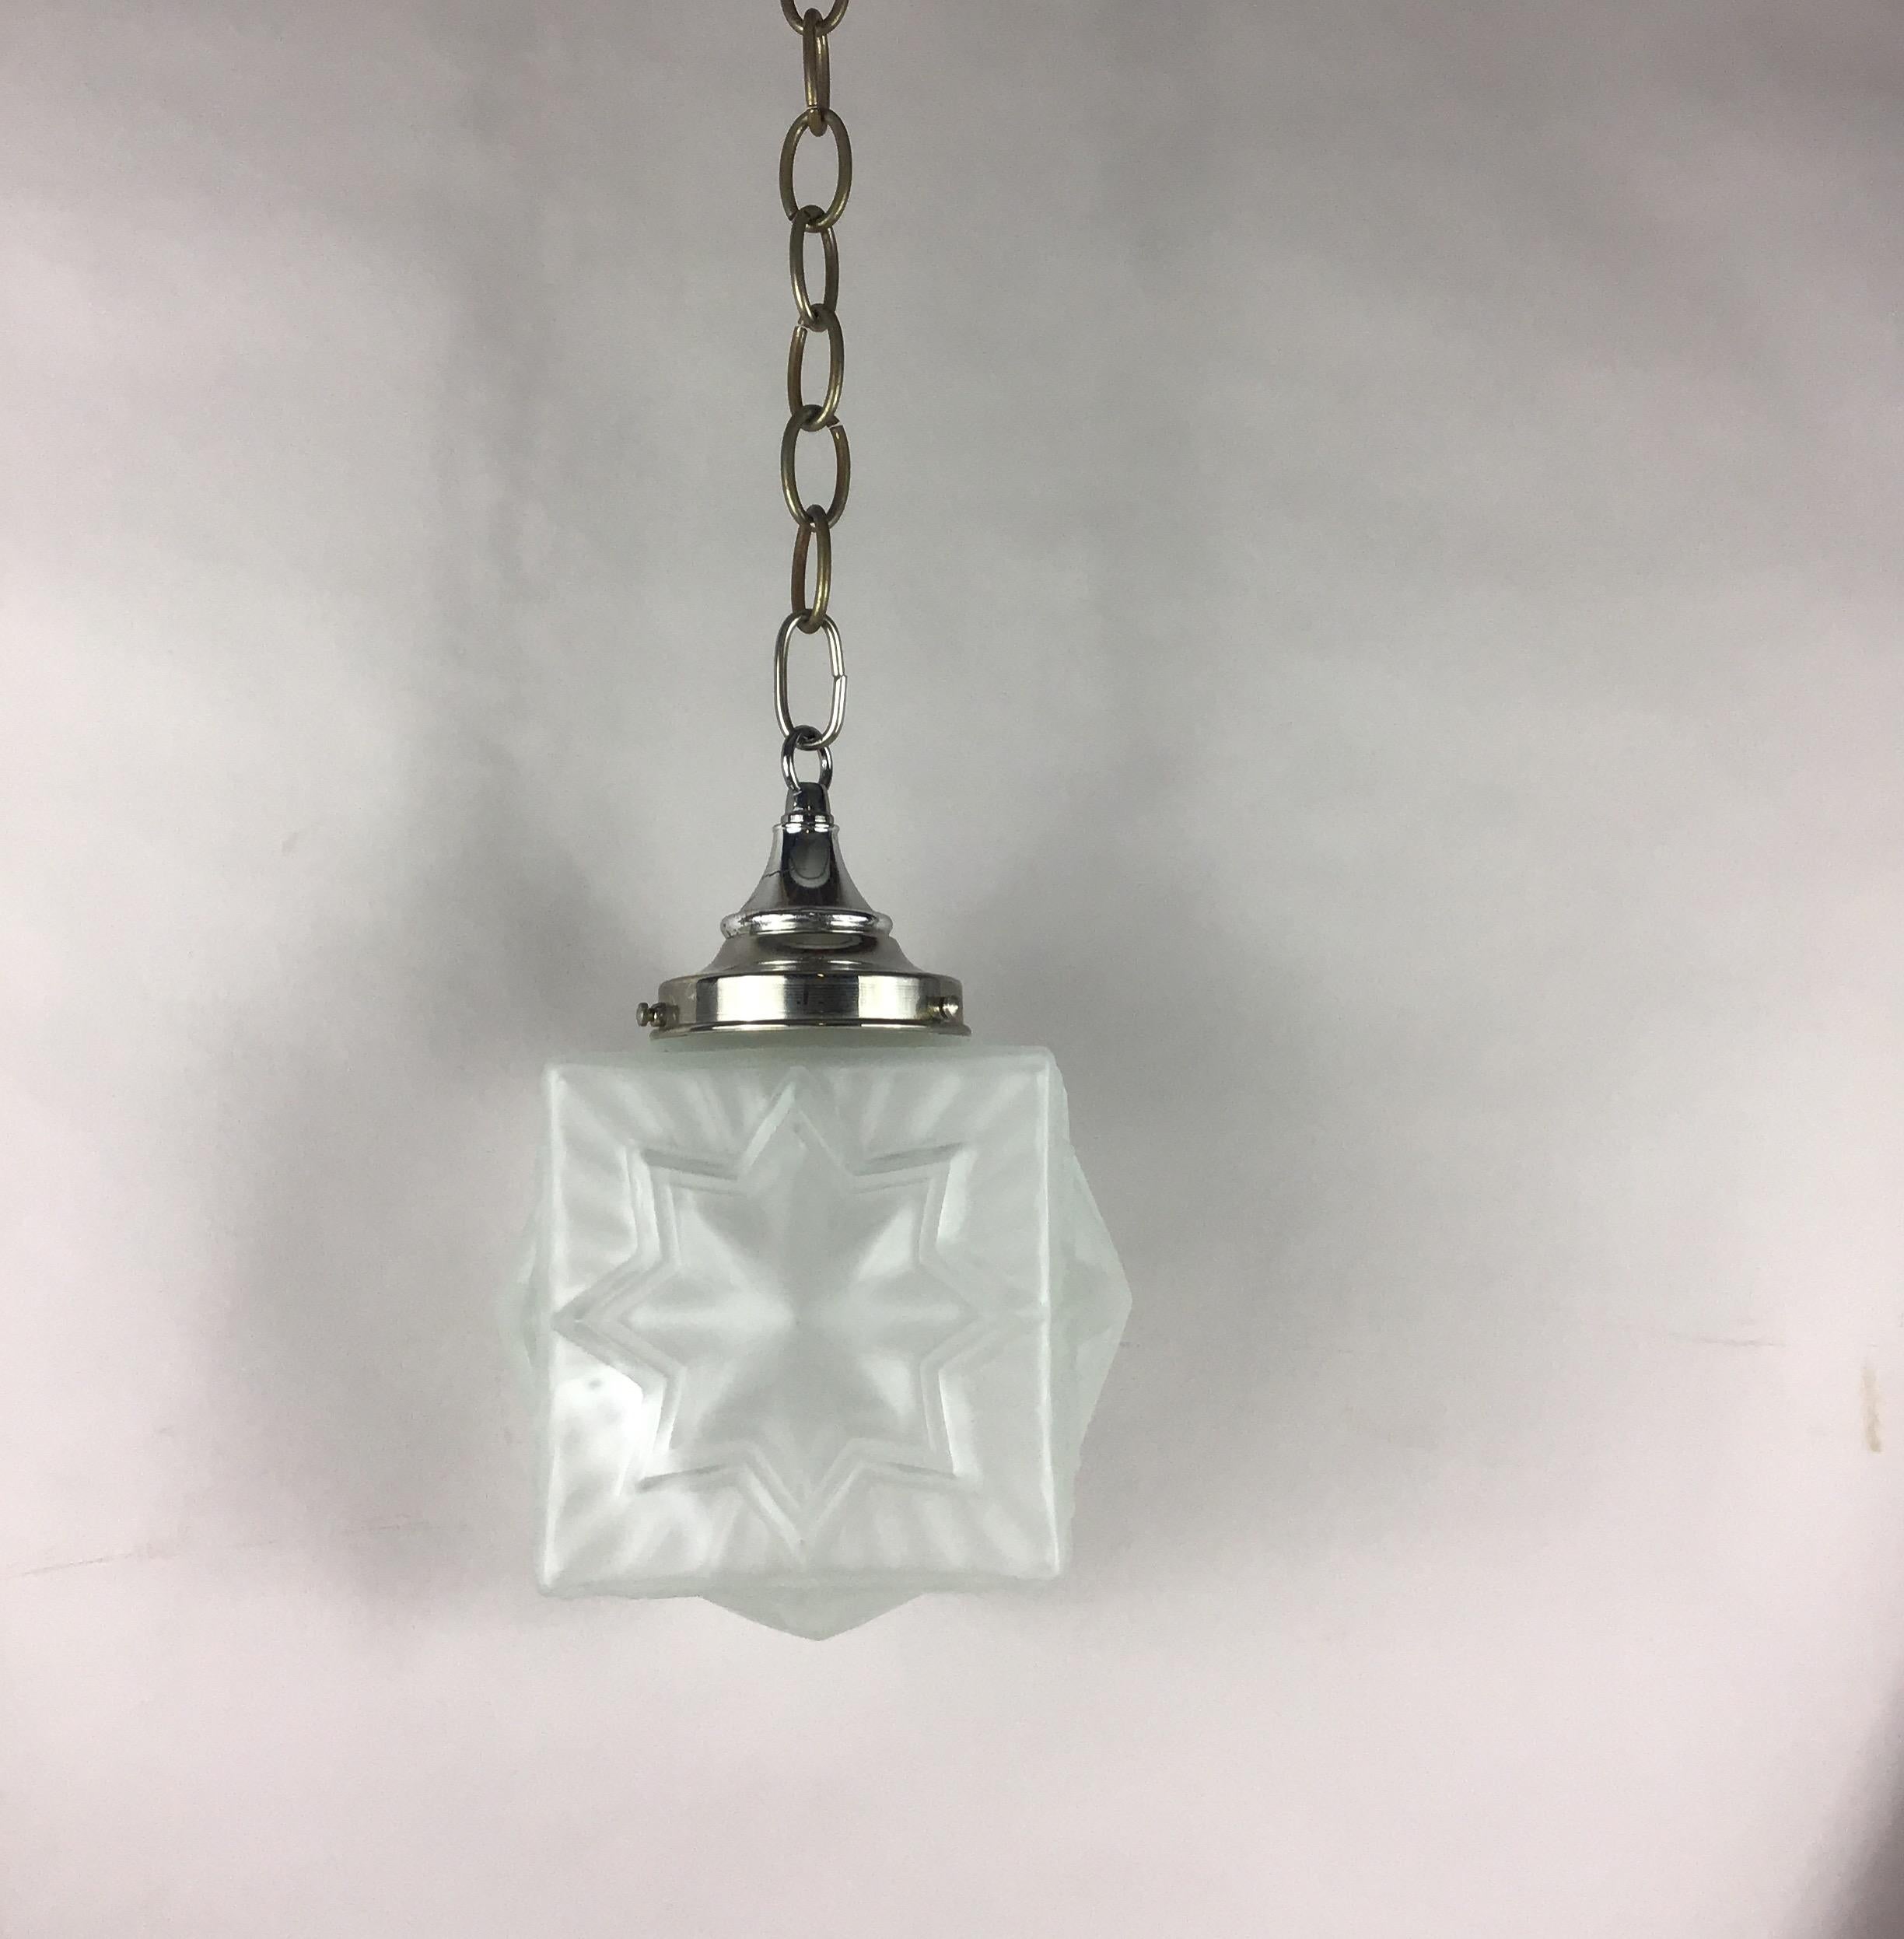 1-3058ab Frosted glass star pendant
Takes one 100 watt Edison based bulb
2 available priced individually
Supplied with 30